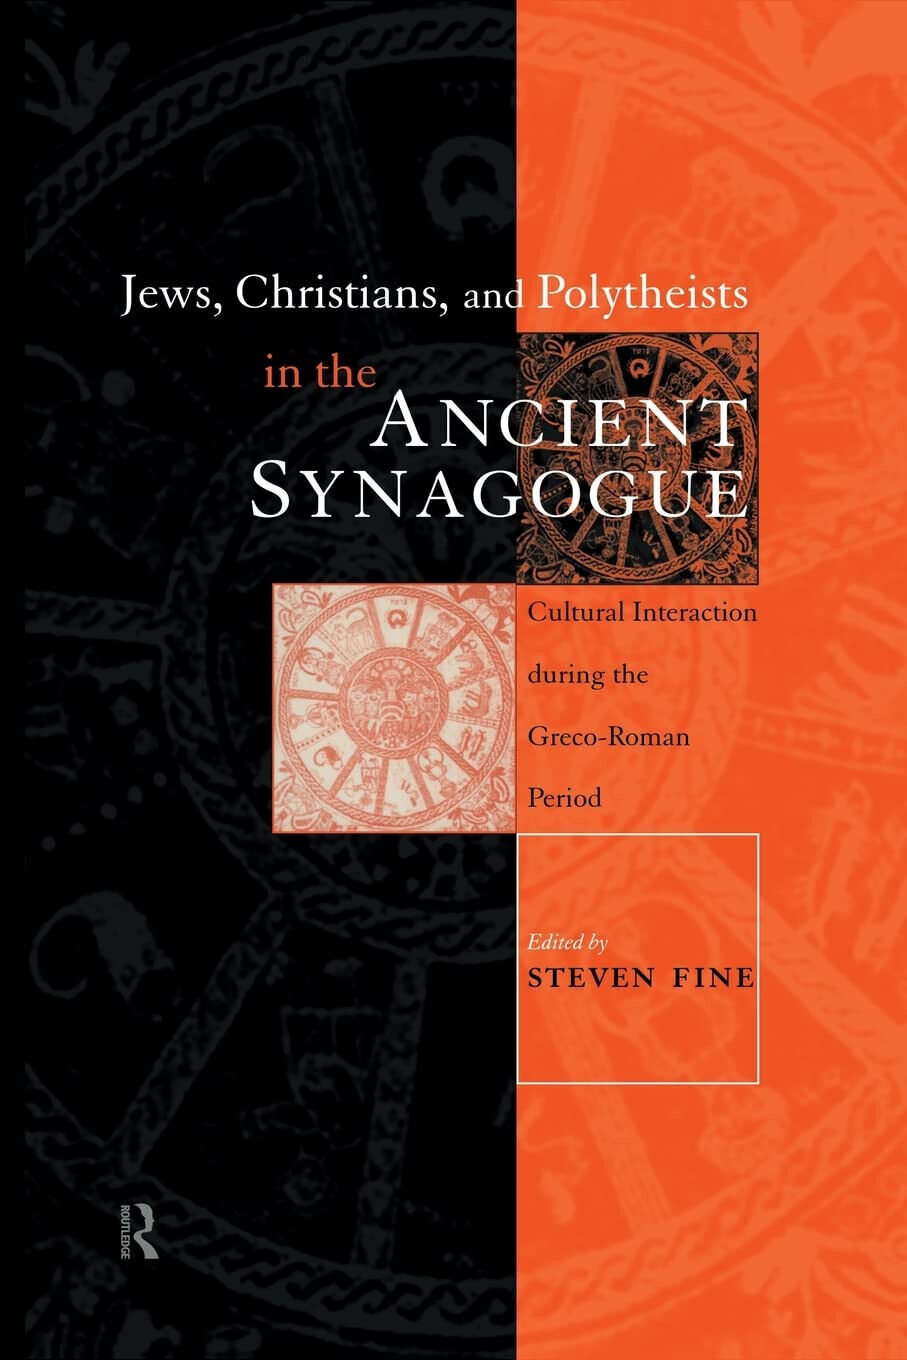 Jews, Christians and Polytheists in the Ancient Synagogue - Steven Fine - 2012